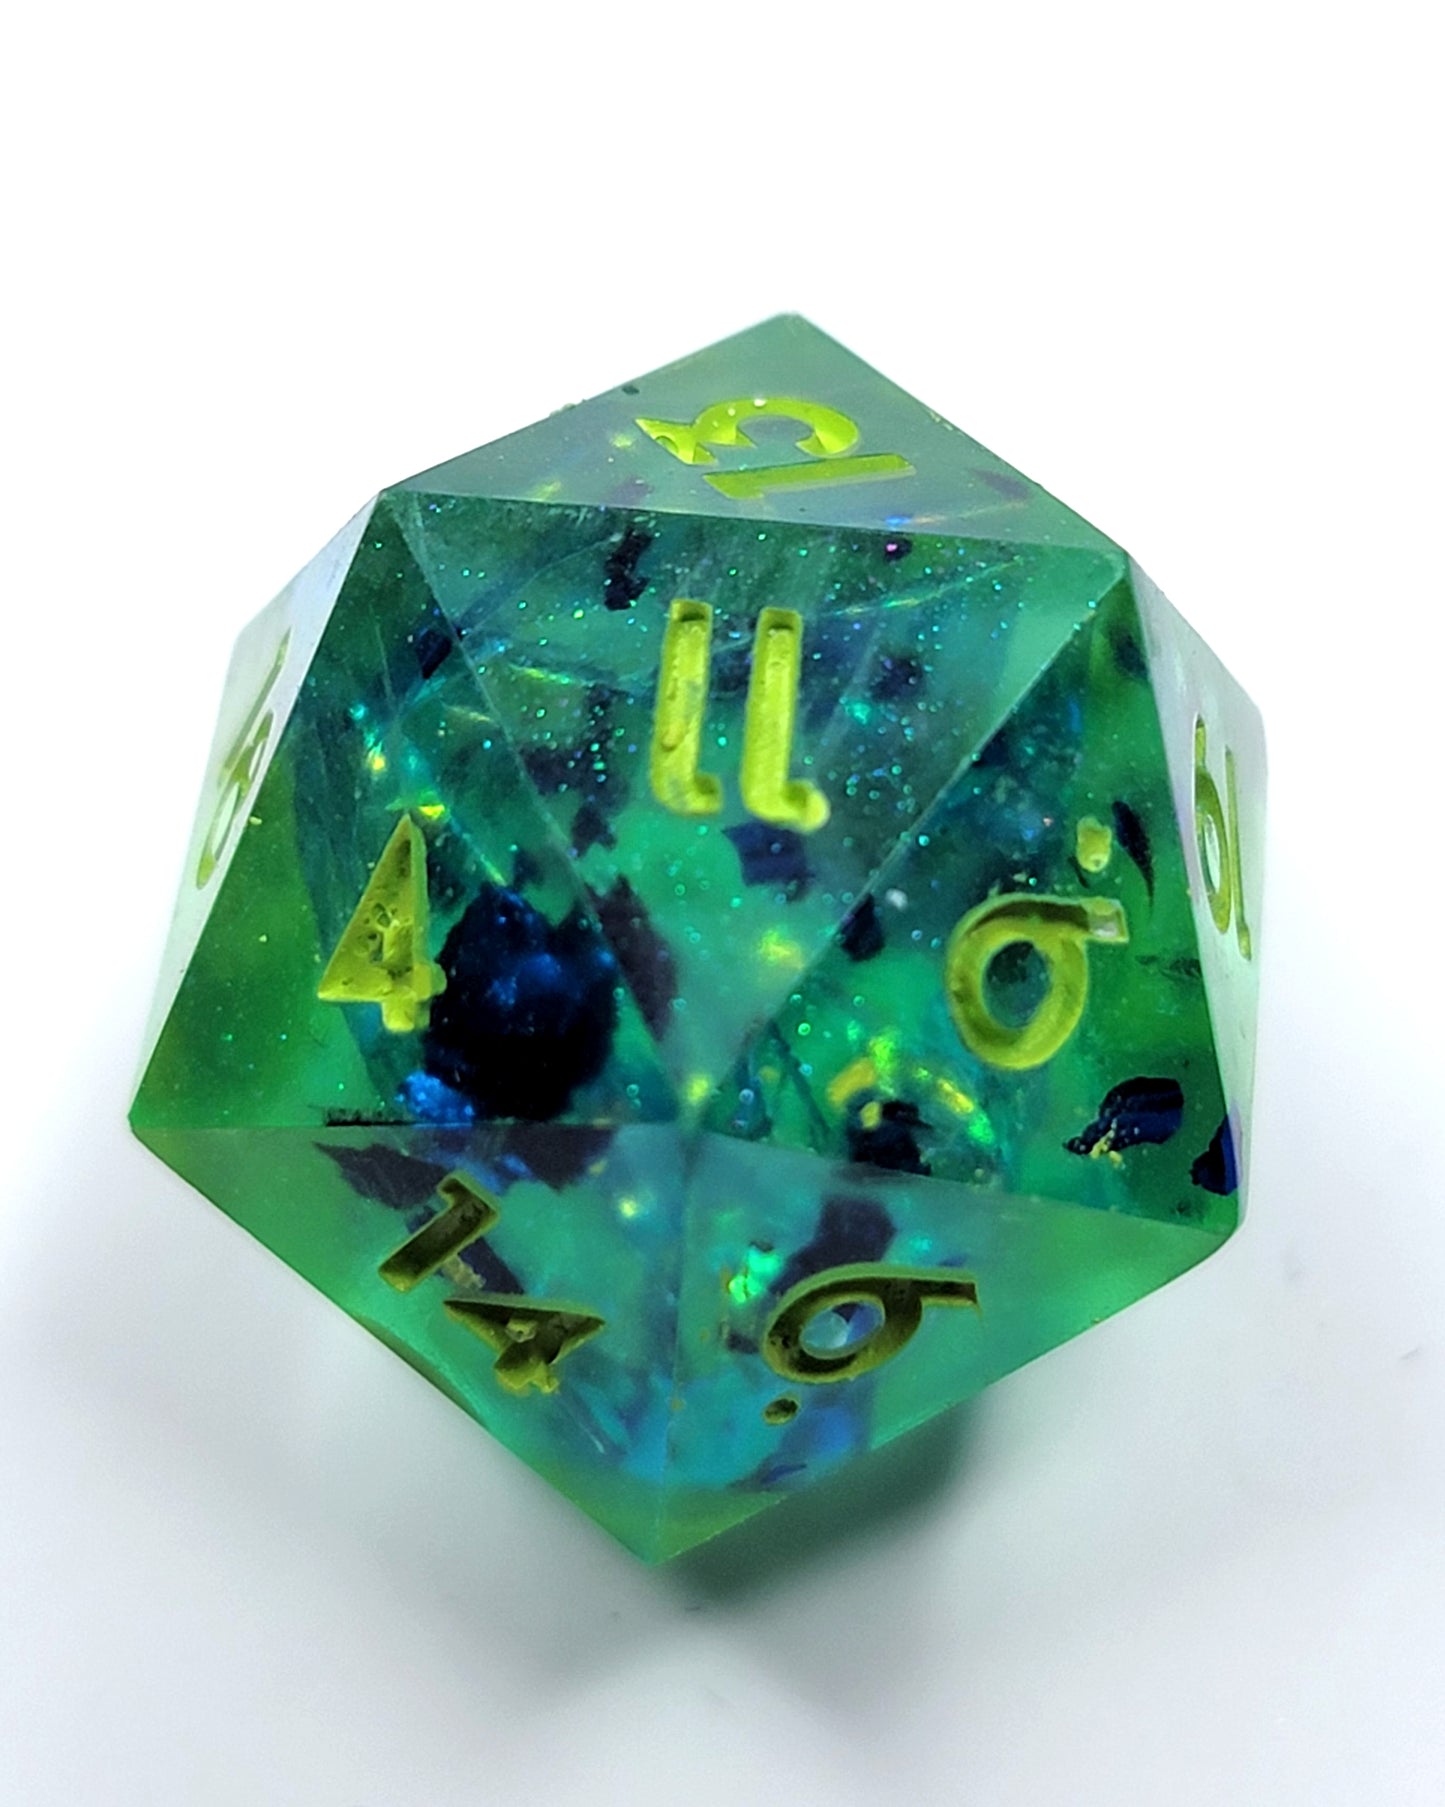 Mermaid Pool -1 D20 | Handmade Dice | Hand Crafted Dungeons and Dragons Dice